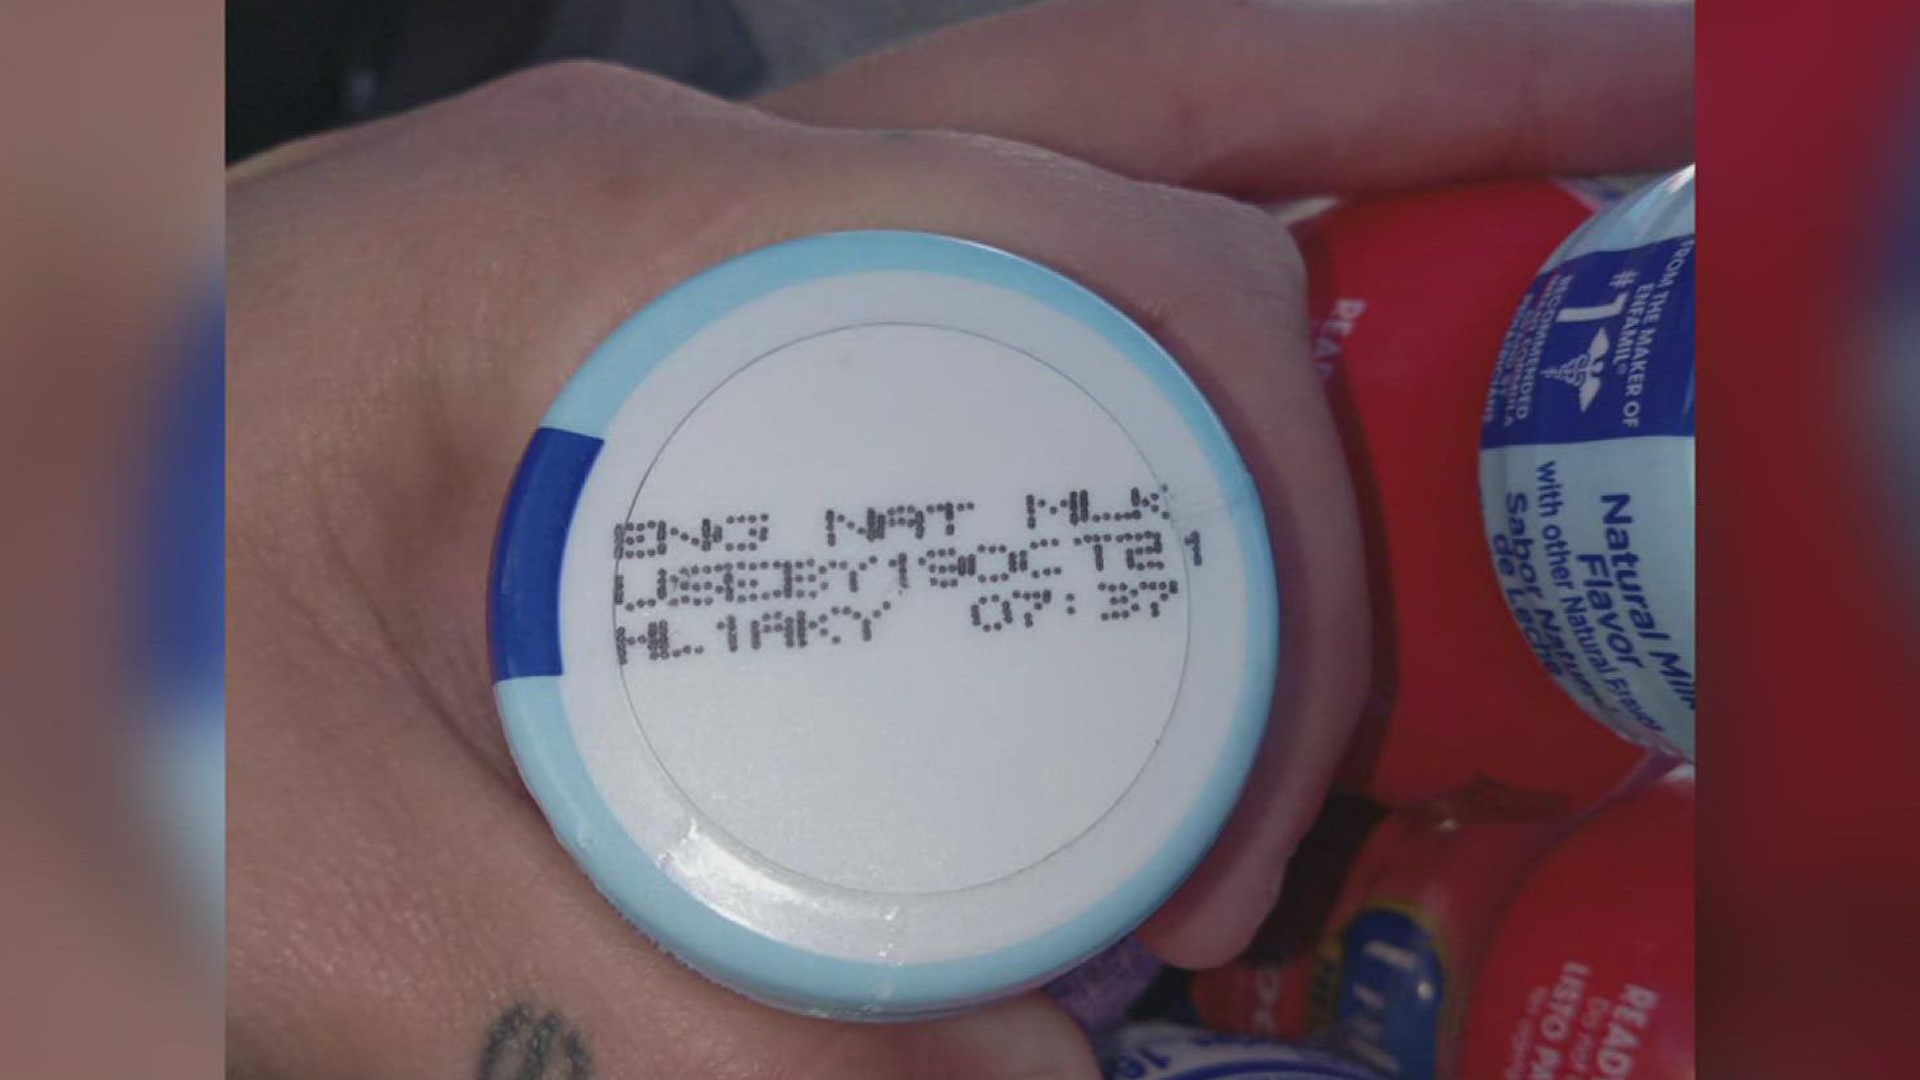 The label on the baby formula read "use by Oct. 19, 2021," a whole year past its expiration date.